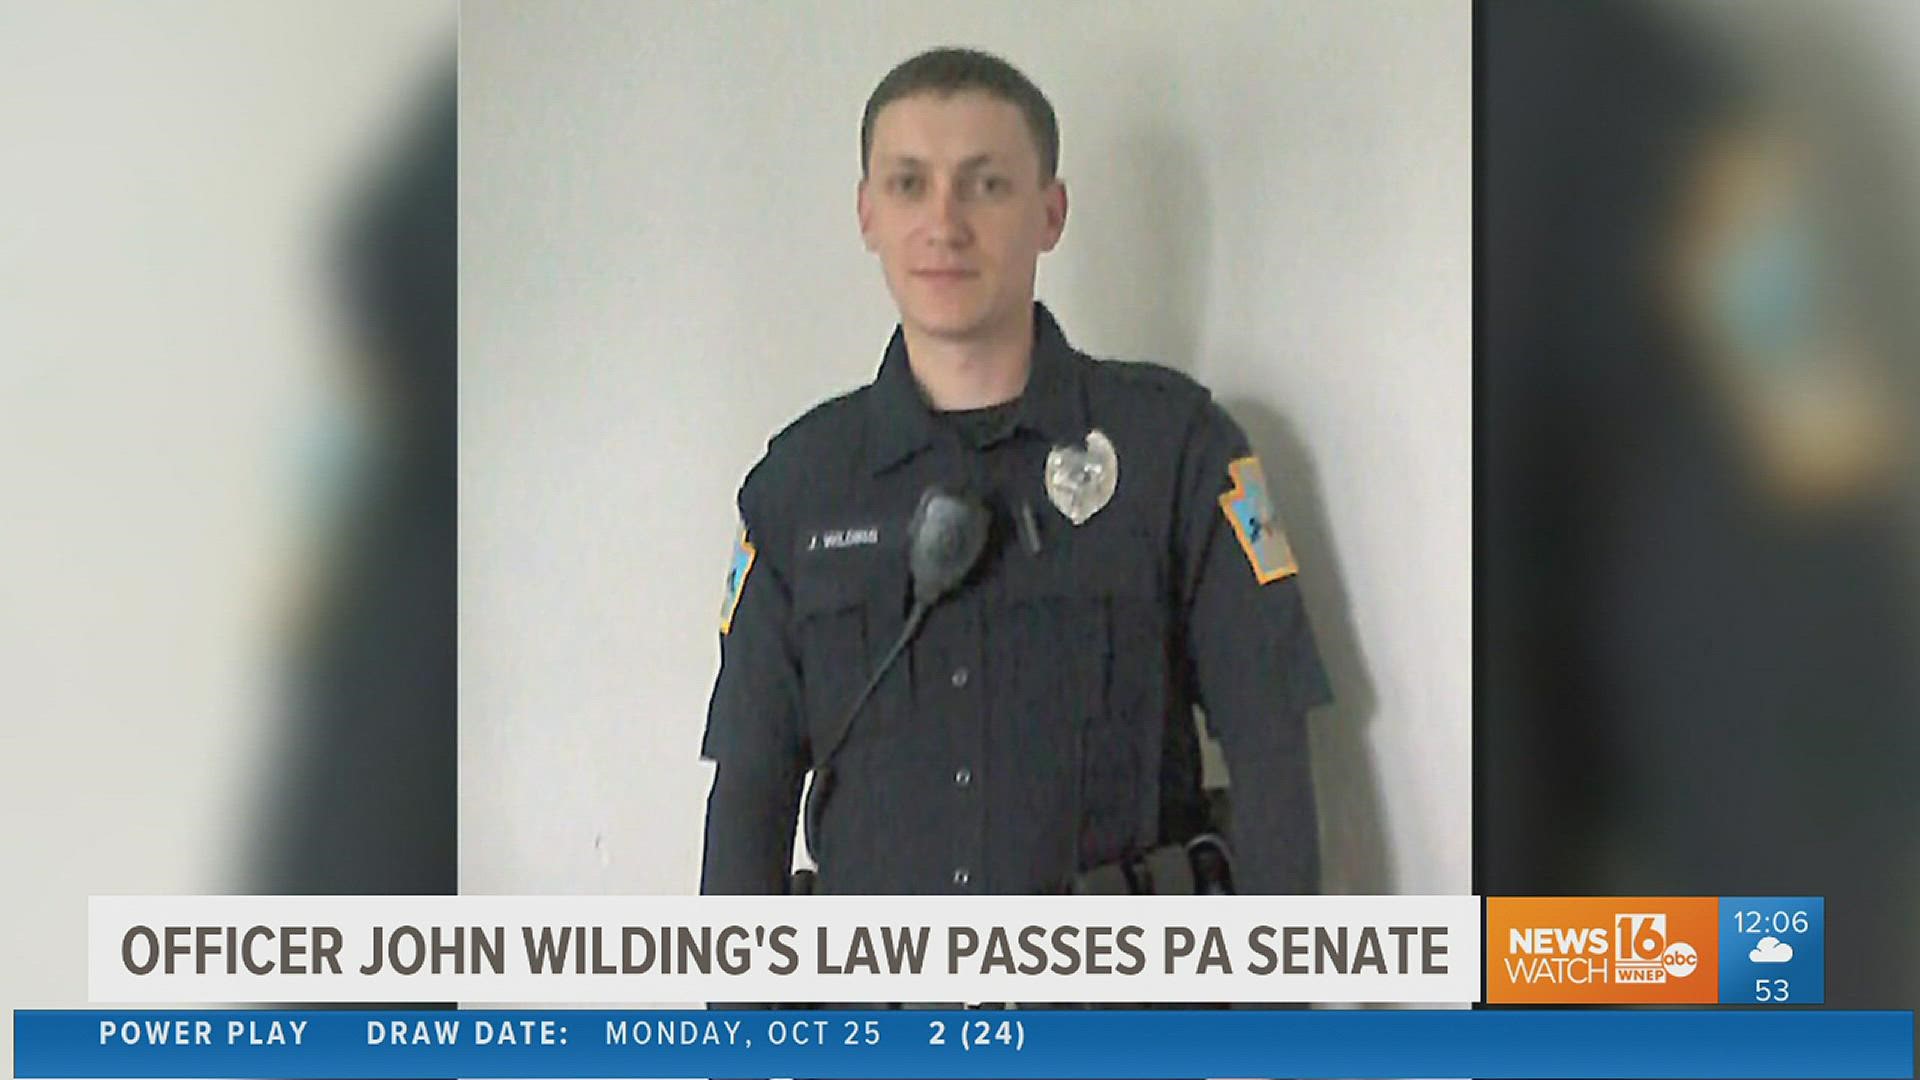 The state senate passed a bill in honor of a fallen Scranton police officer.